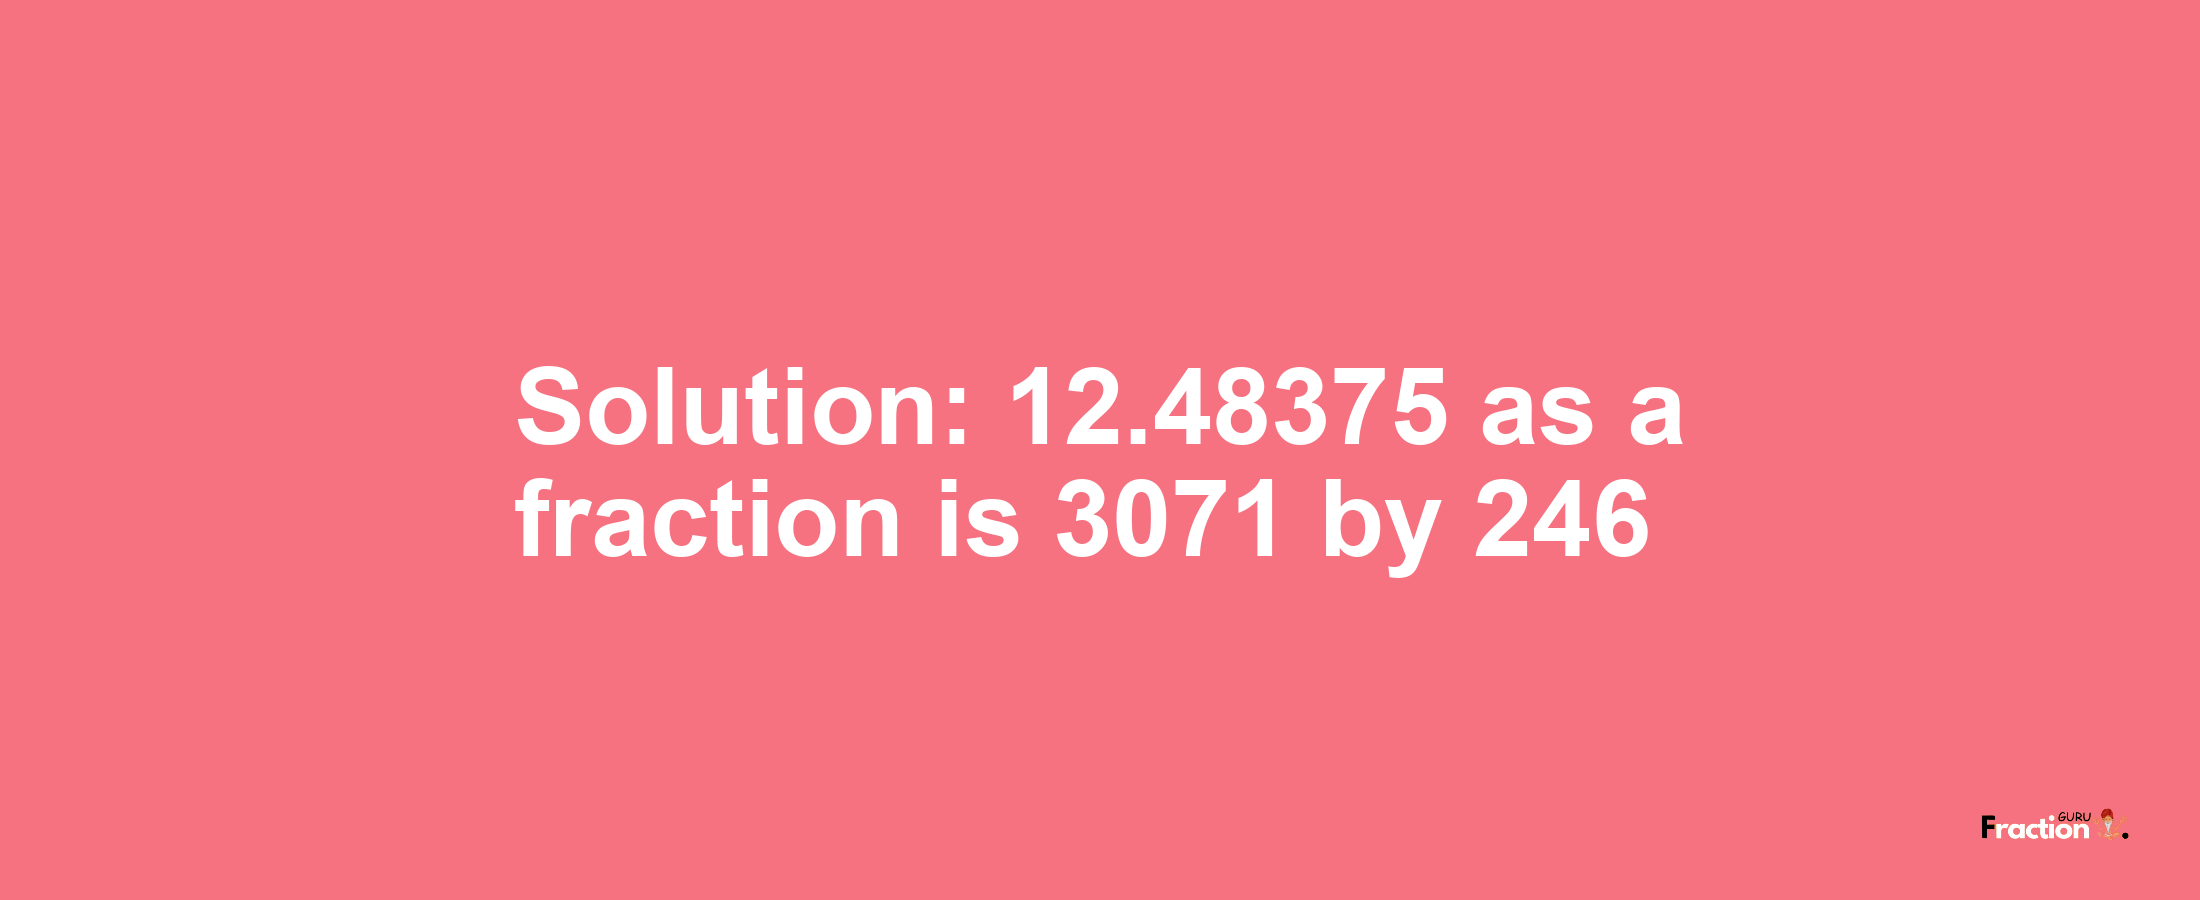 Solution:12.48375 as a fraction is 3071/246